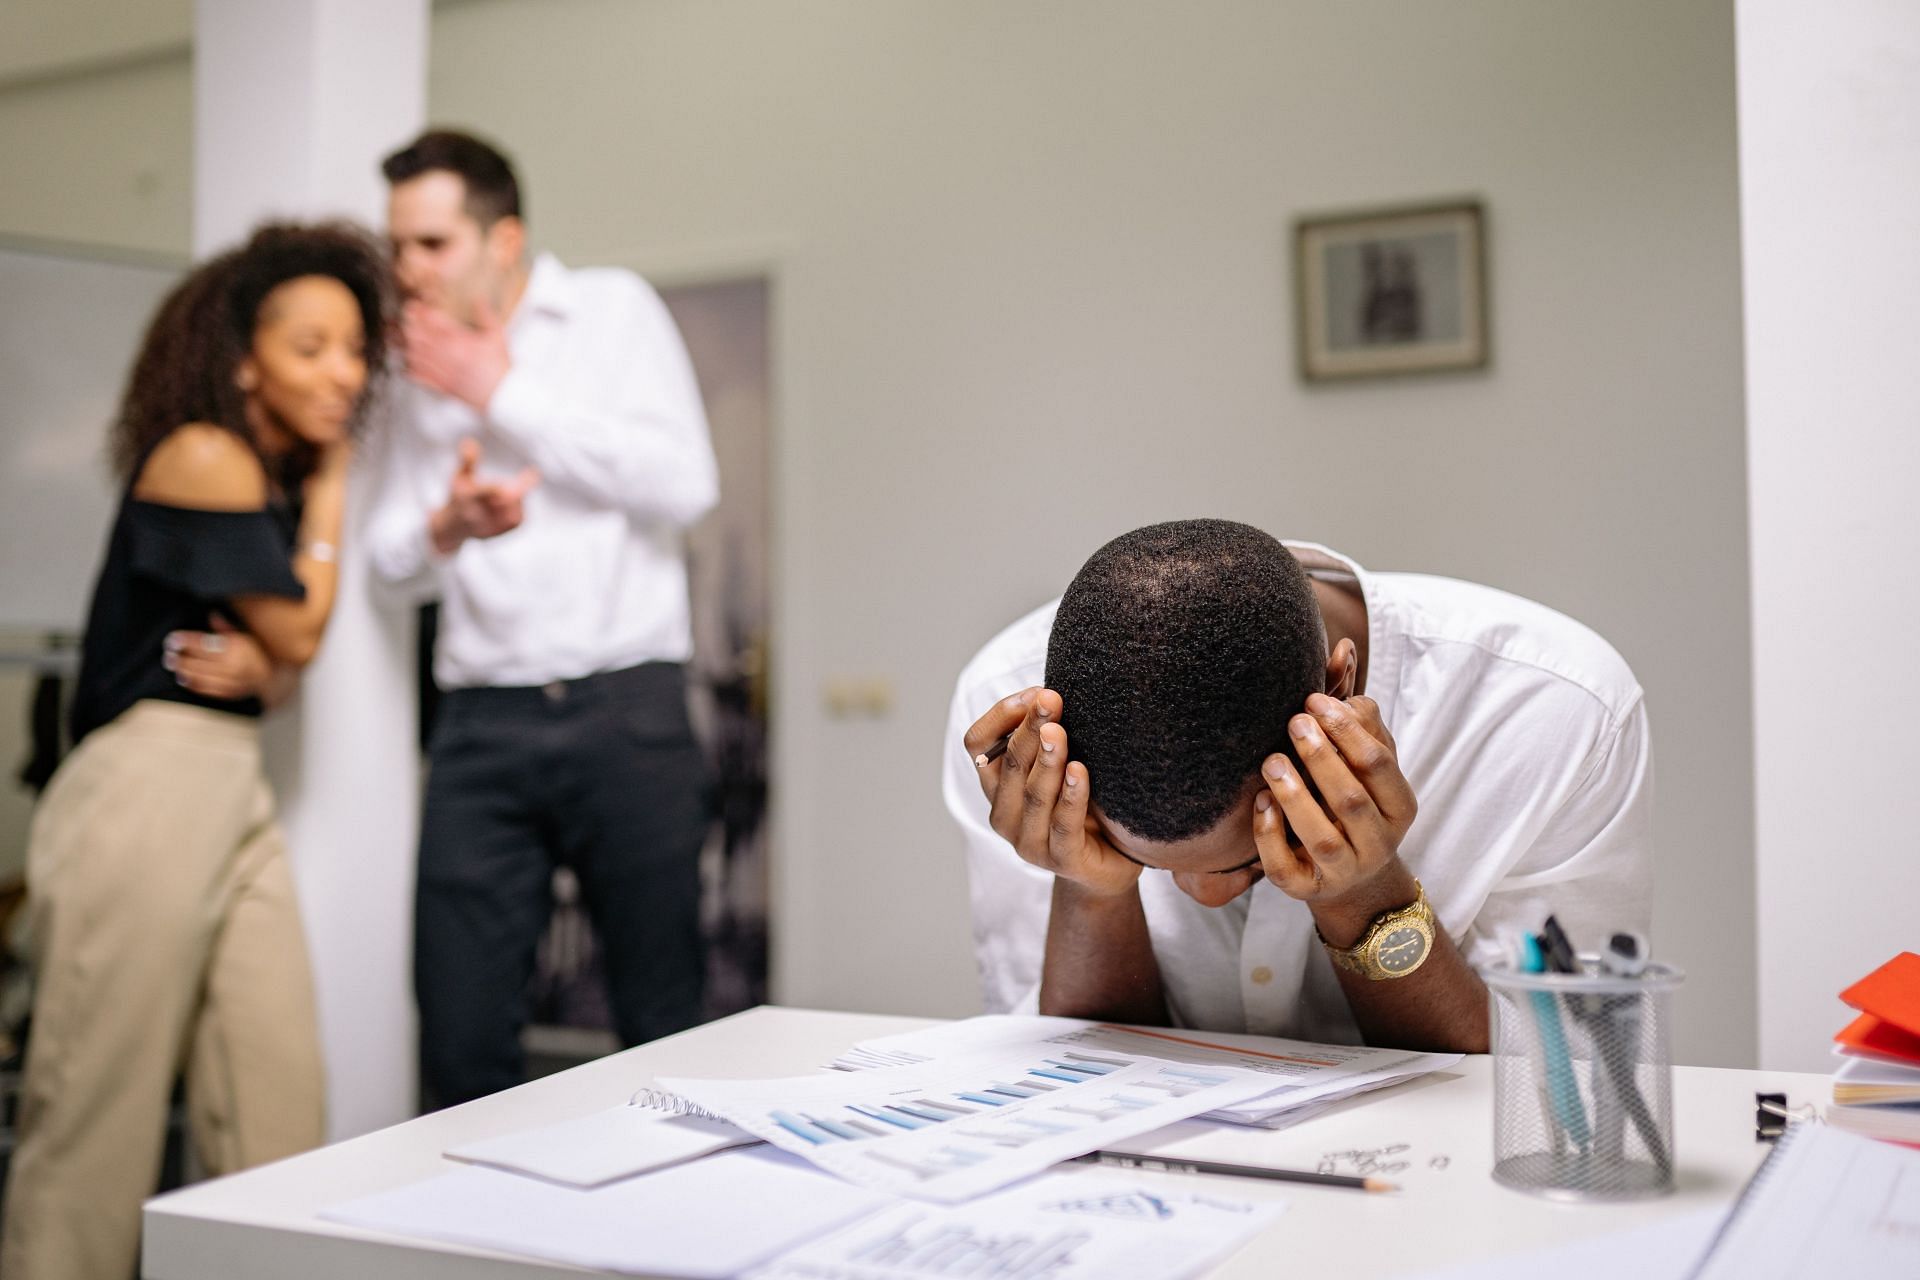 How do you know you are being bullied at the workplace? (Image via Pexels/Yan Krukau)